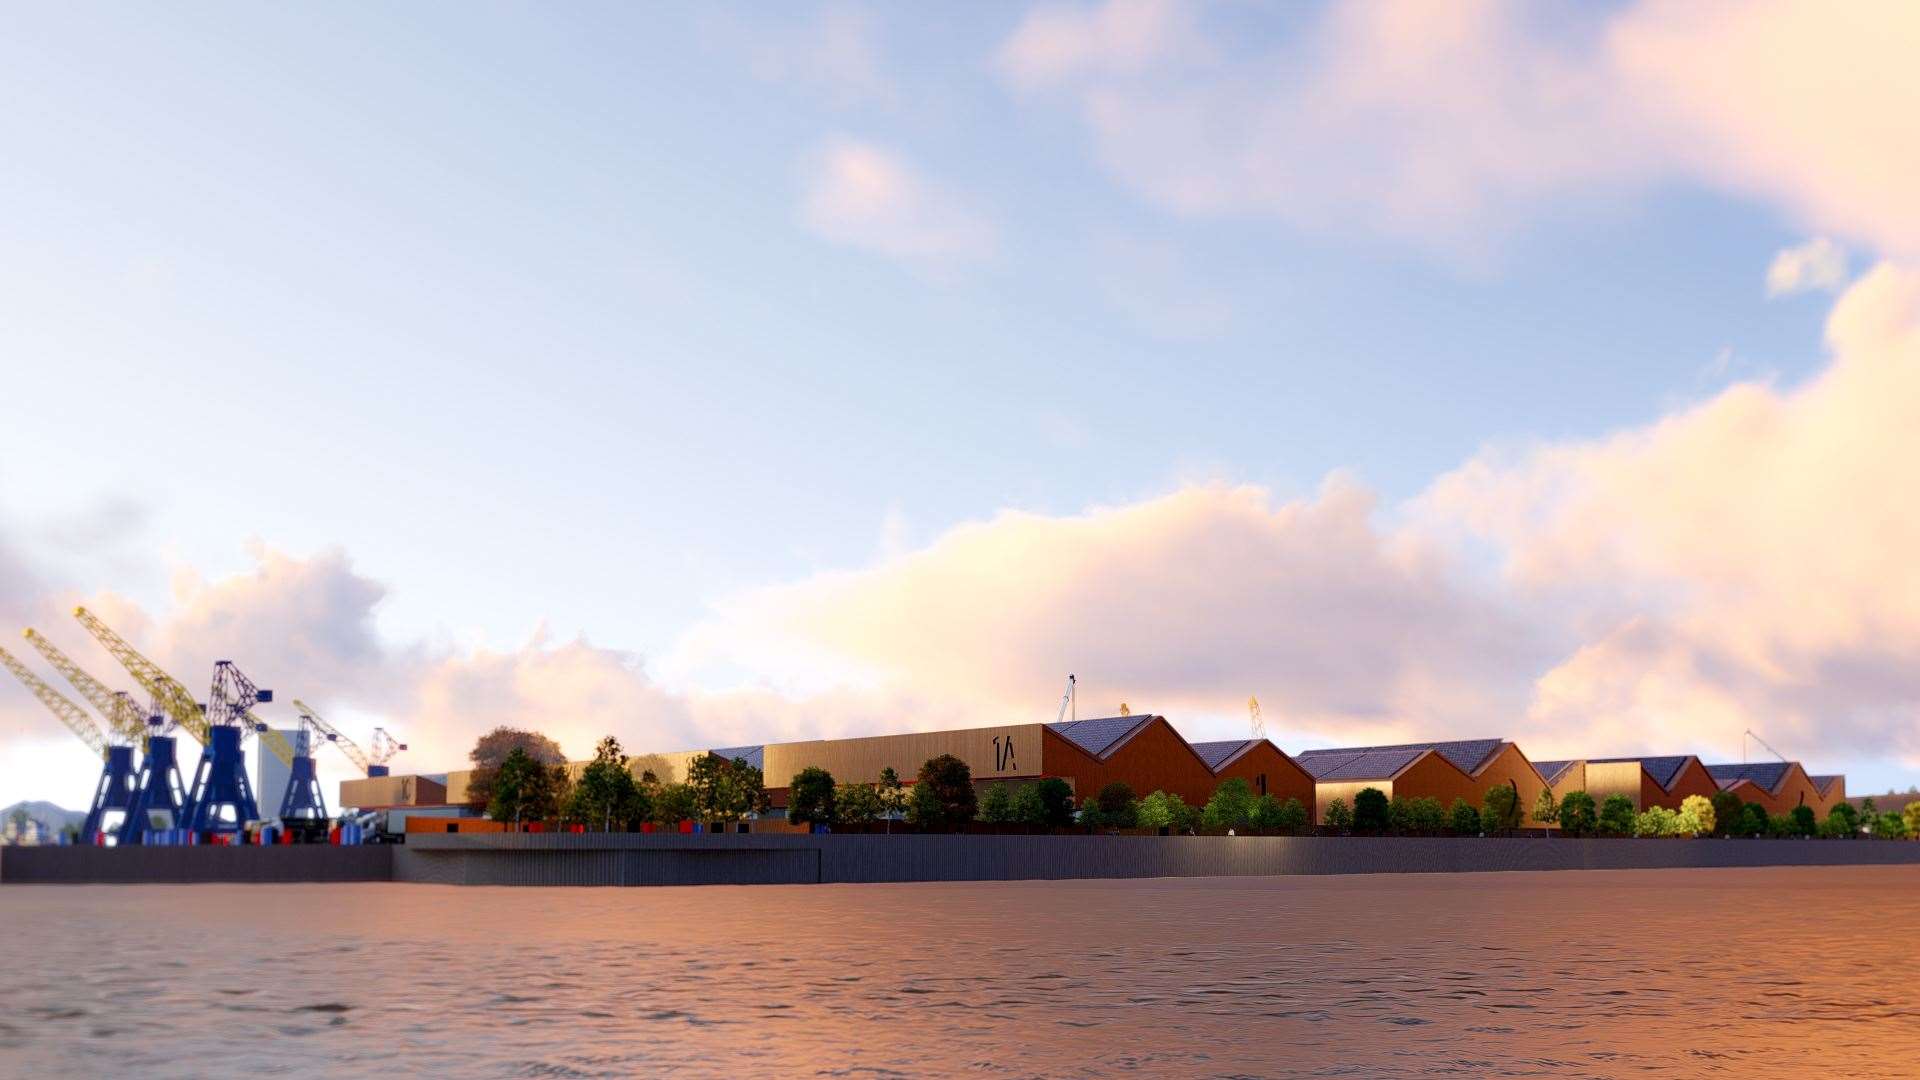 An architect's impression of what Chatham Docks could look like. Picture: SPPARC